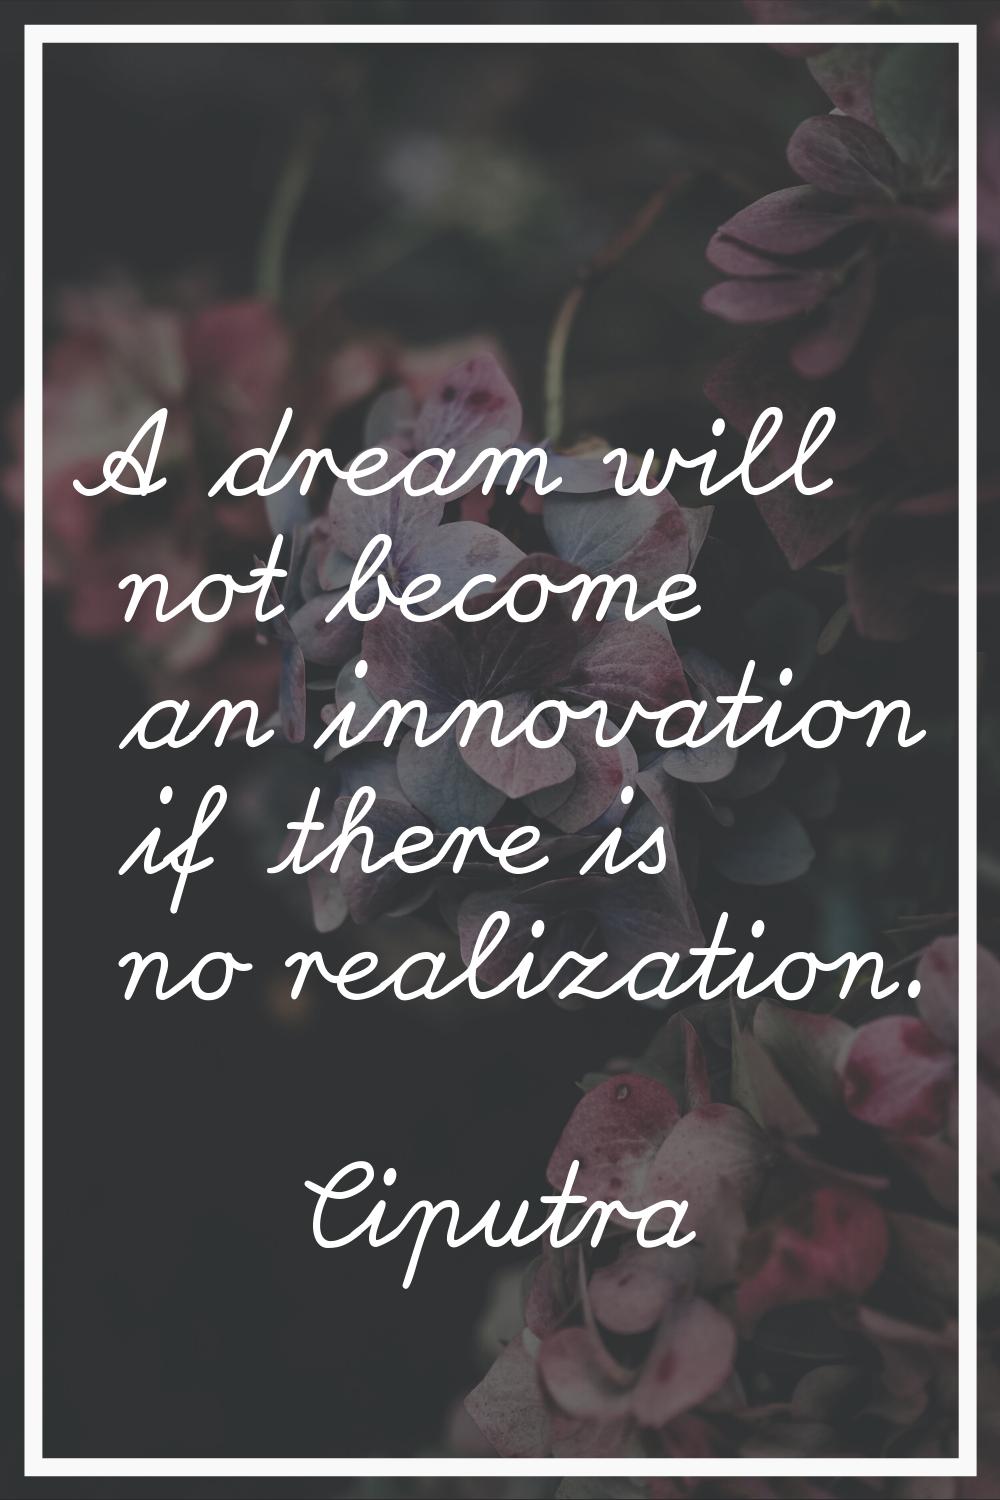 A dream will not become an innovation if there is no realization.